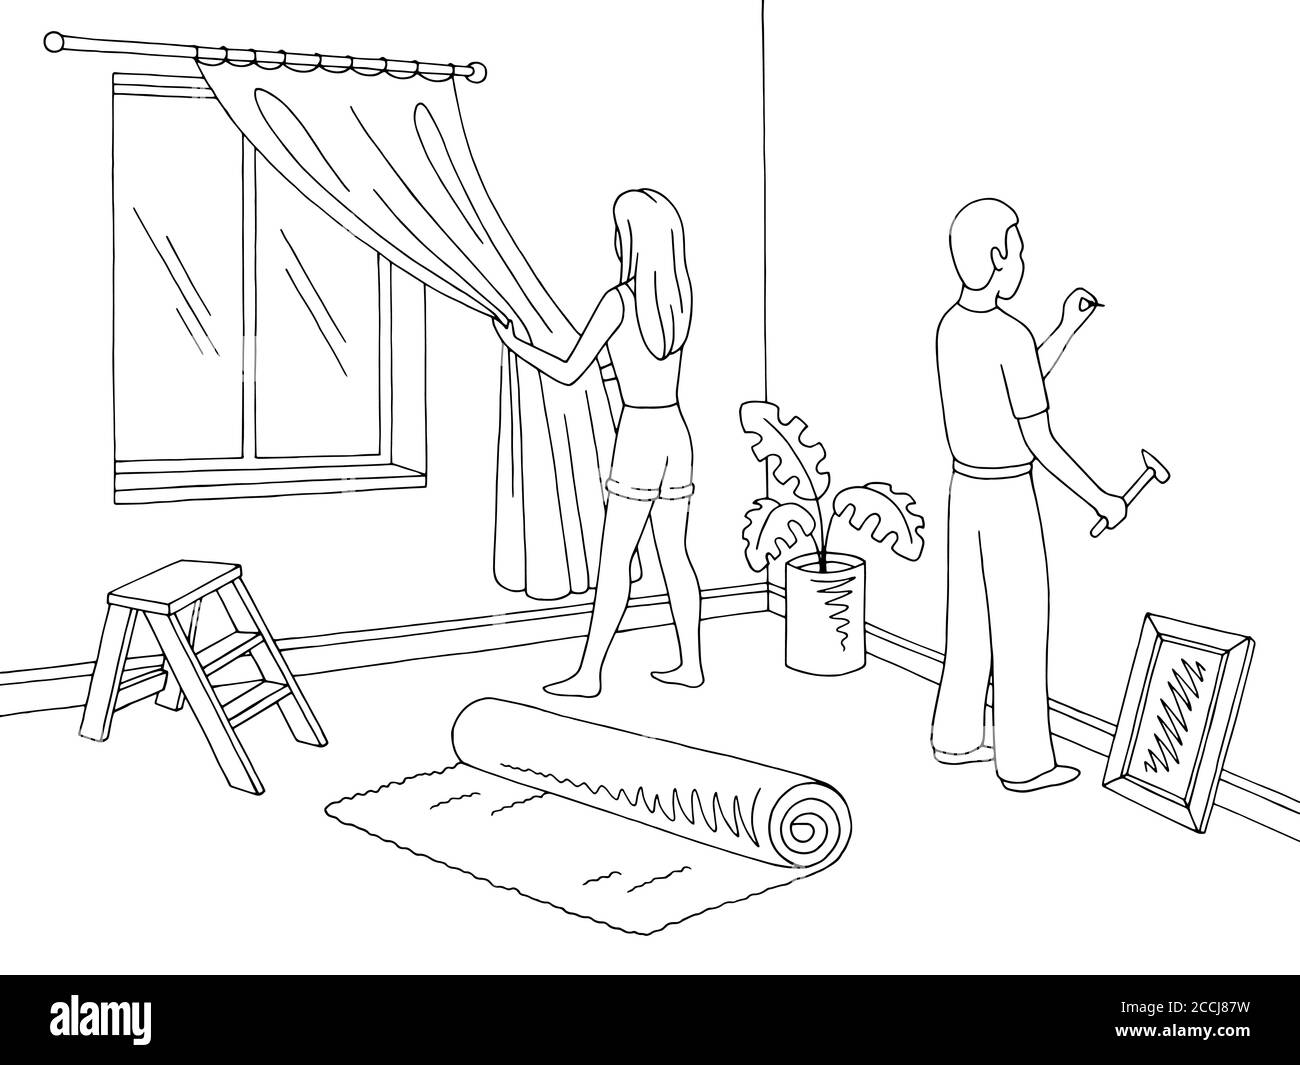 Renovation room home interior graphic black white sketch illustration vector. Man is hammering a nail. Woman hanging curtain Stock Vector